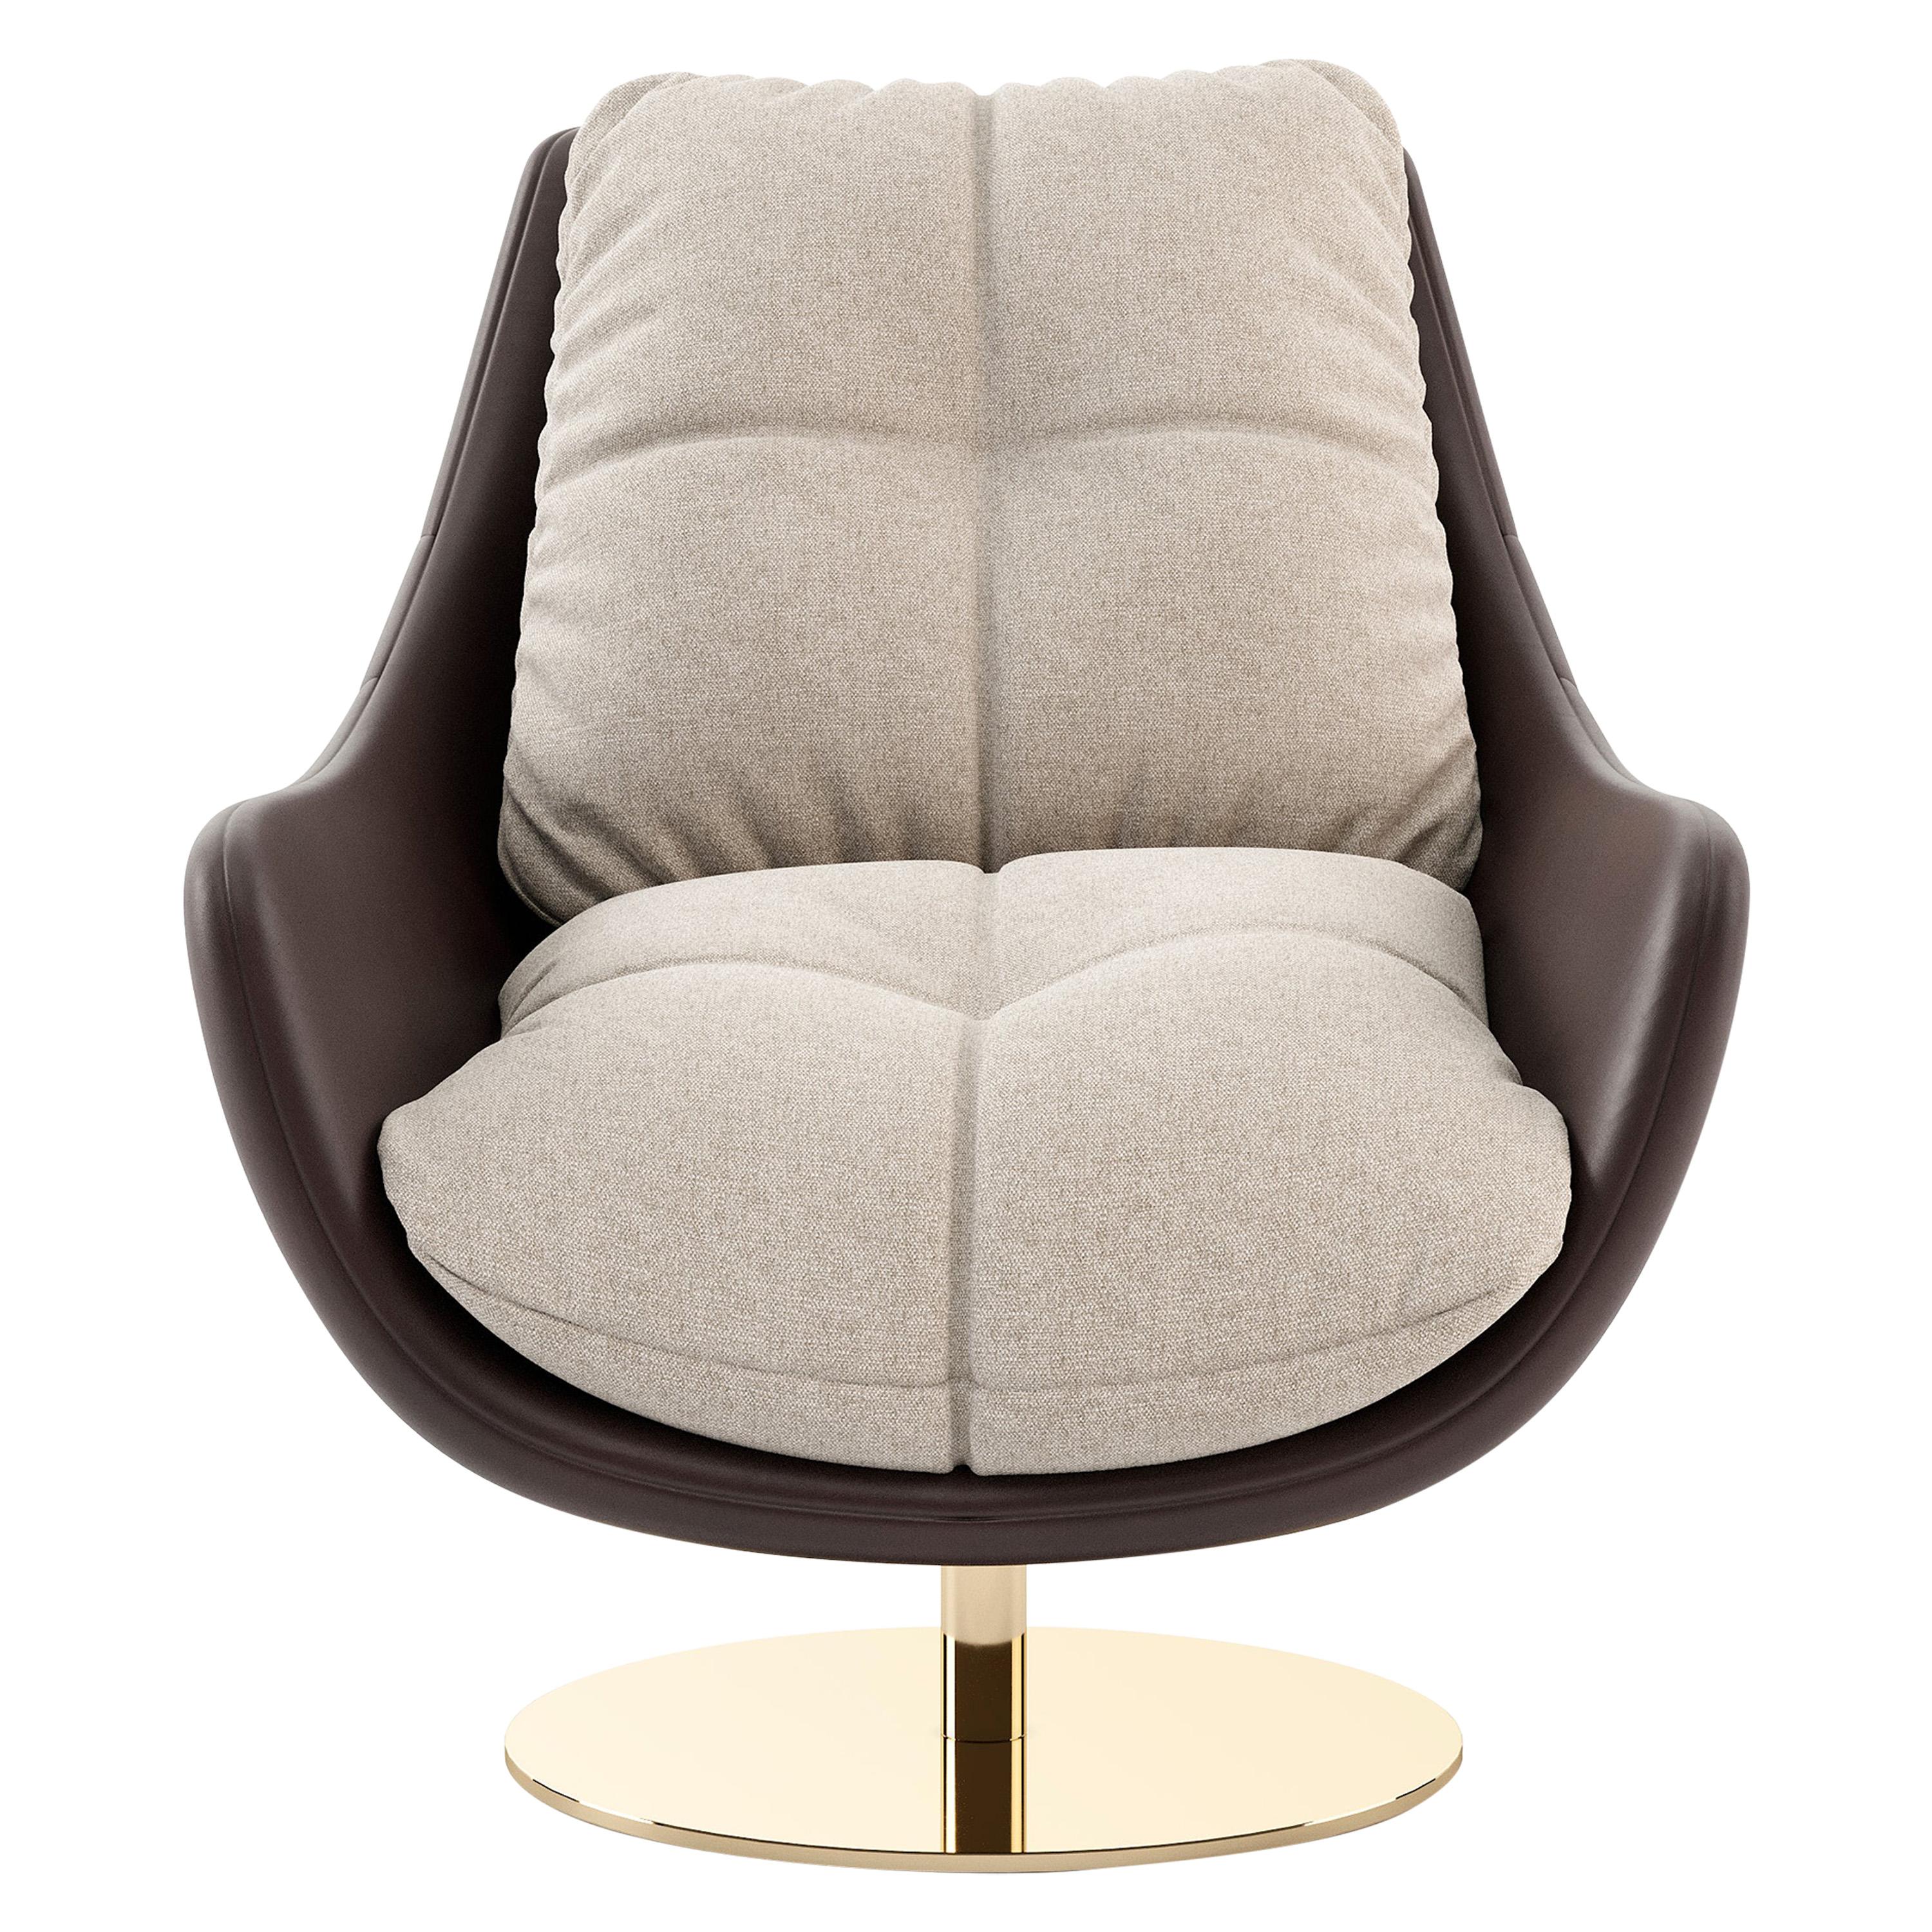 Sophia Armchair, Portuguese 21st Century Contemporary Upholstered with Leather